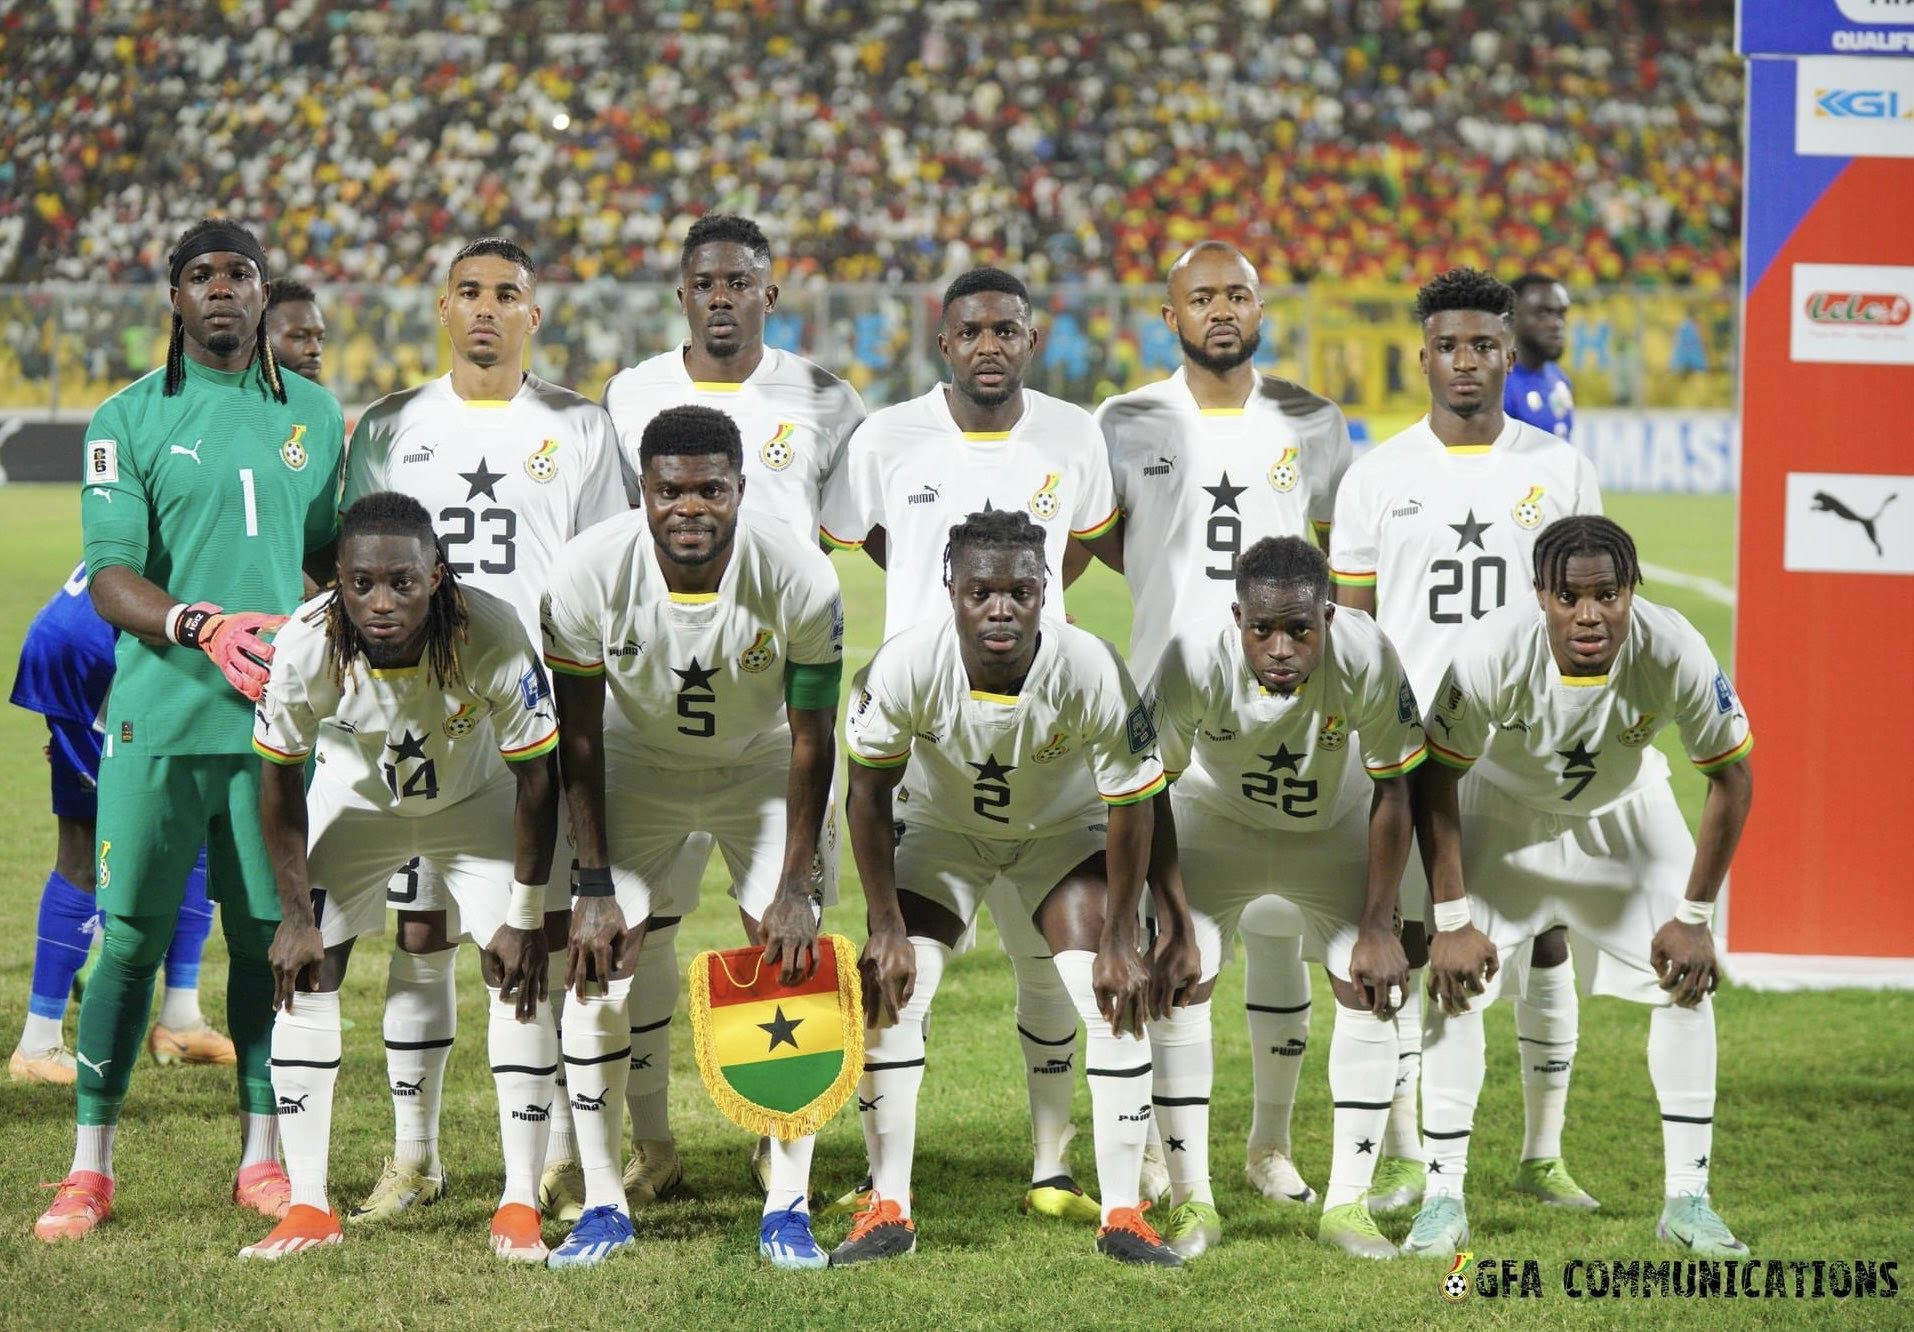 Ghana gets tough draw in AFCON 2025 qualifiers, set to face Sudan, Angola The Black Stars of Ghana have been paired against Sudan, Angola, and Niger in Group F of the qualifiers for the 2025 African Cup of Nations (AFCON).